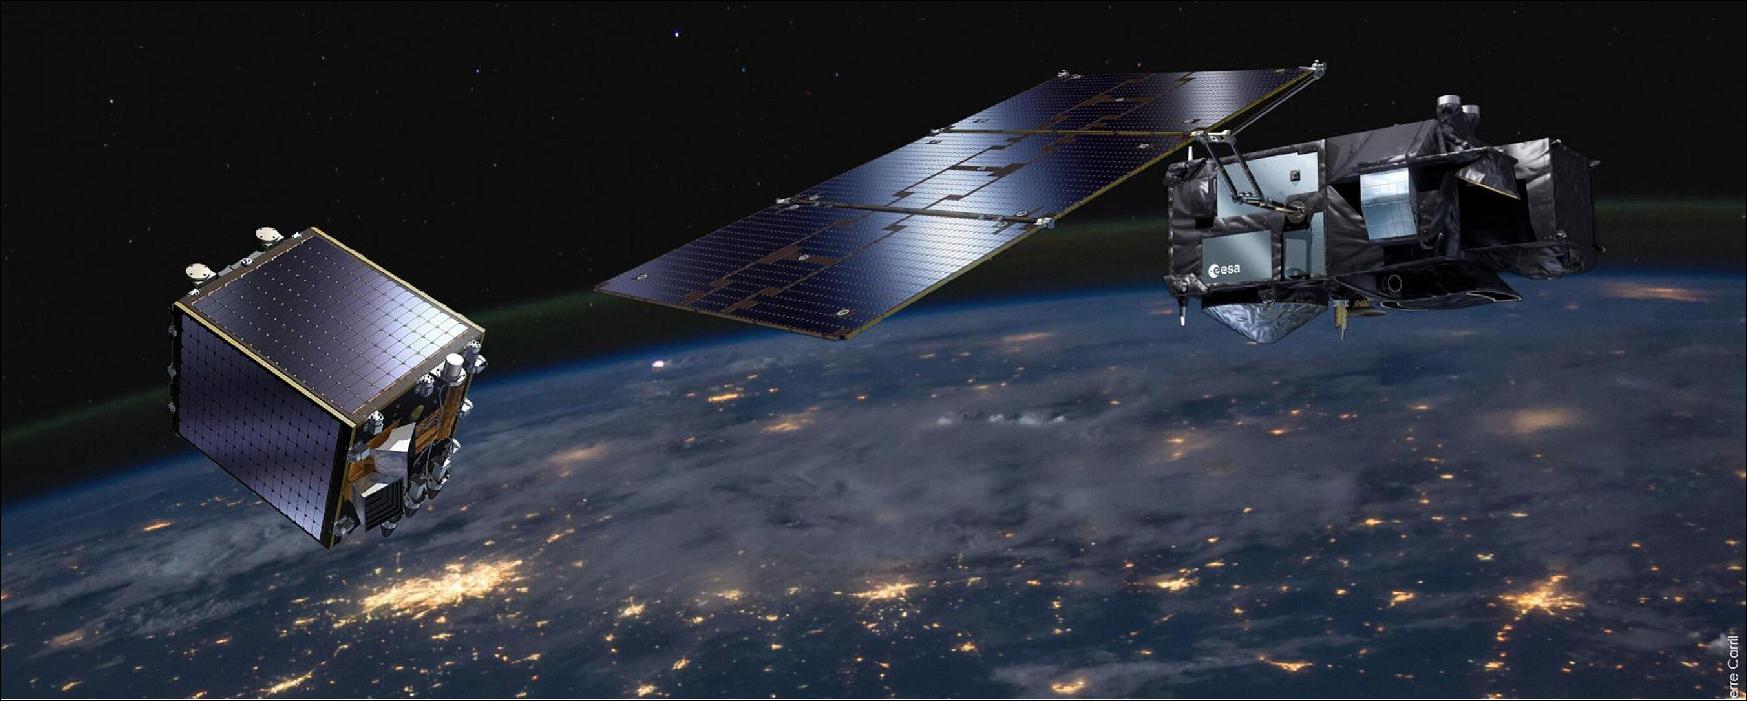 Figure 16: PROBA-V task (at left) is being taken up by the Copernicus Sentinel-3 satellite (at right), image credit: VITO